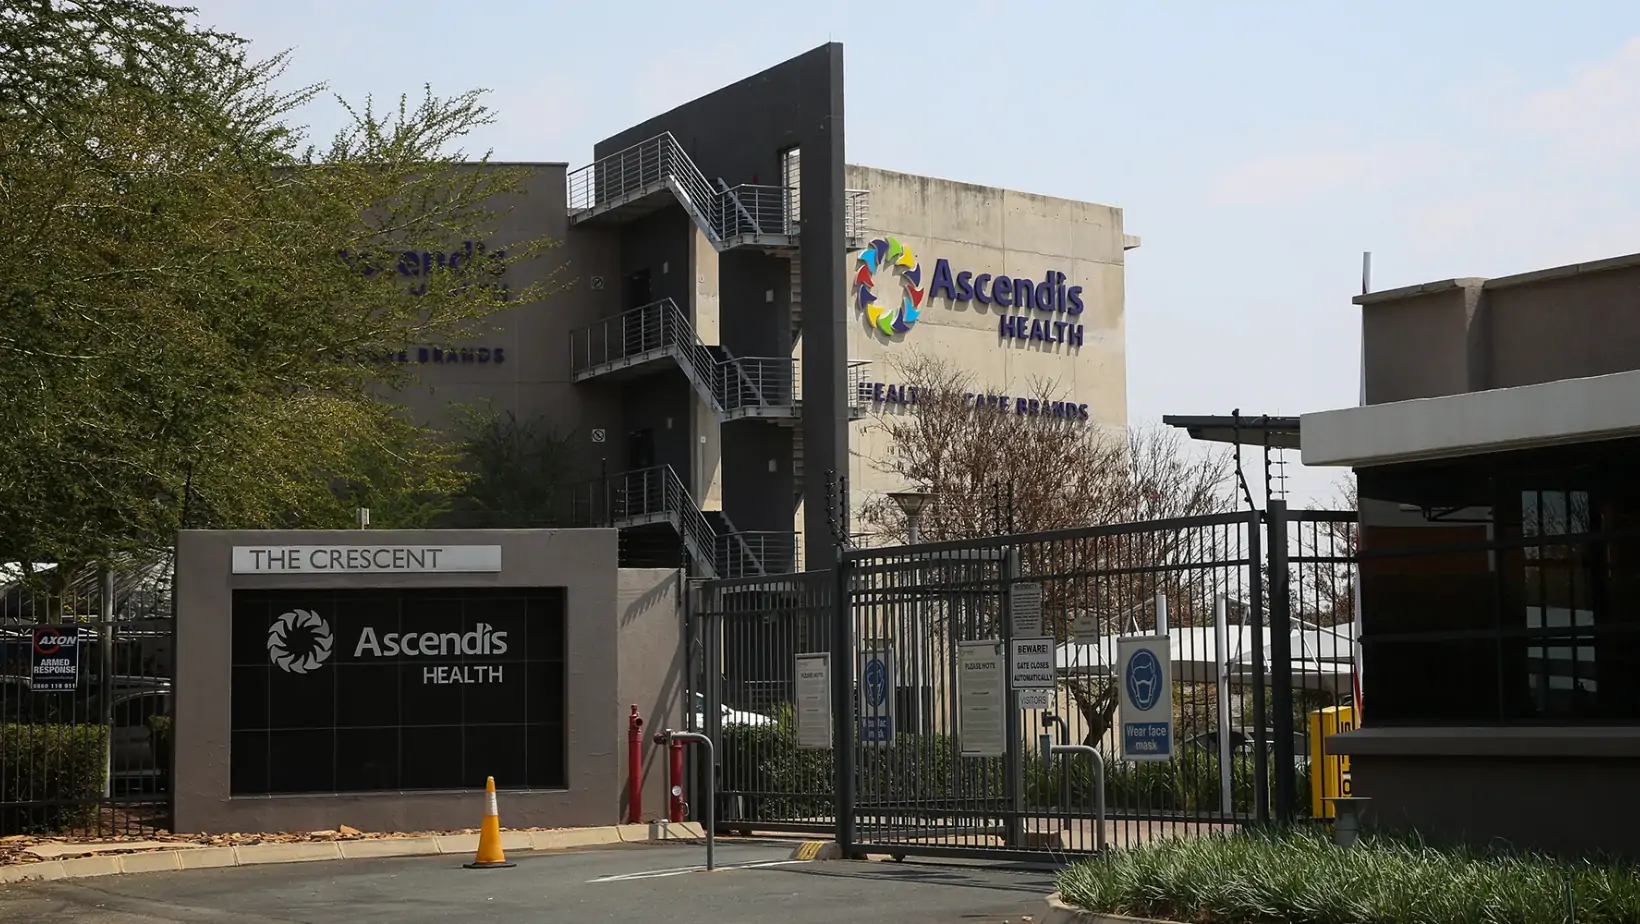 Ascendis Health’s AGM Triumph: 3 Bold Moves That Just Rewrote the Corporate Playbook